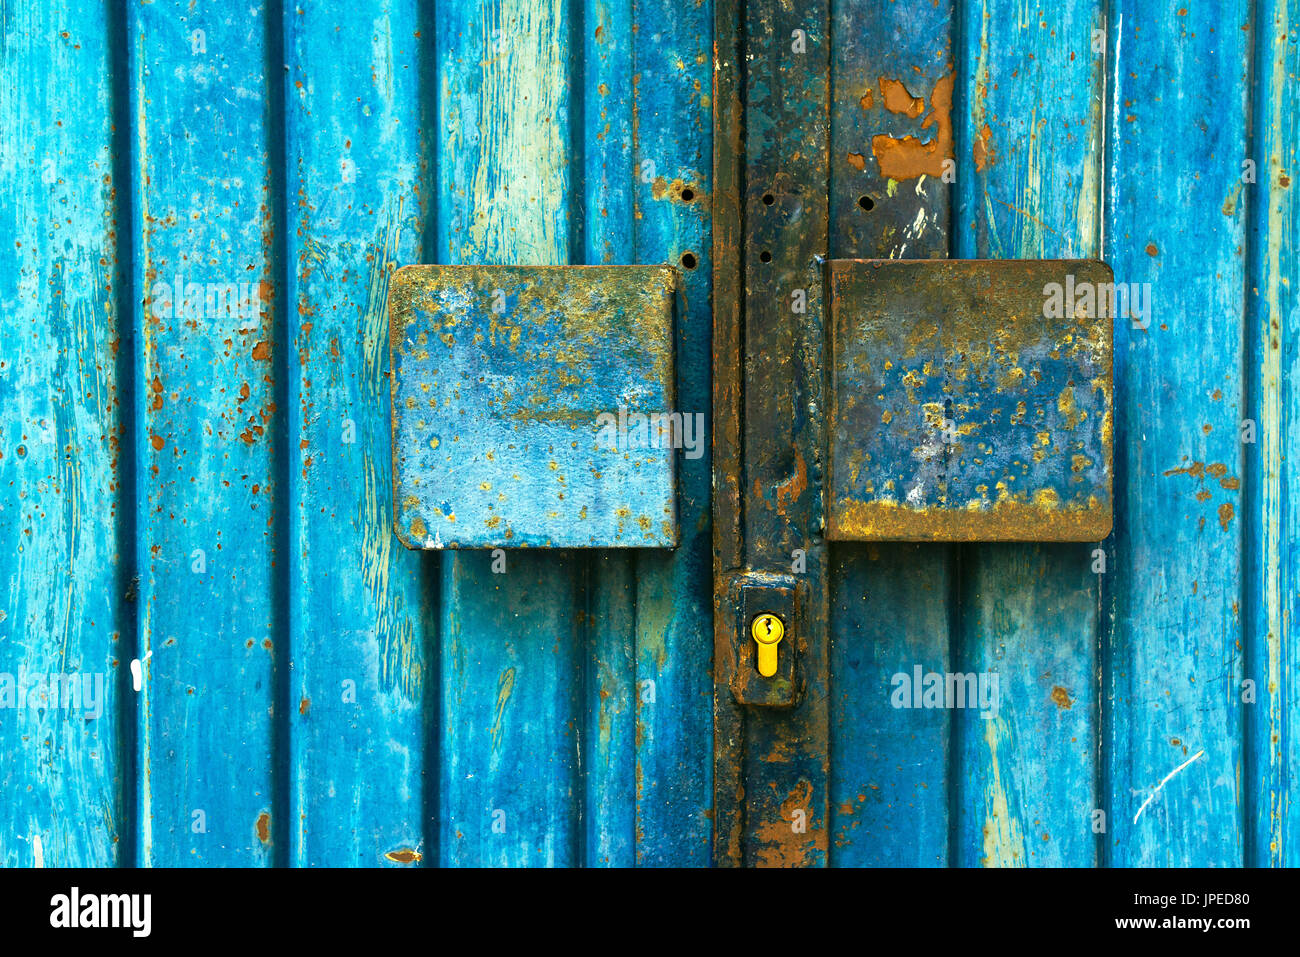 Grunge blue metal garage door, weather worn metallic entrance to a private enclosed parking space Stock Photo